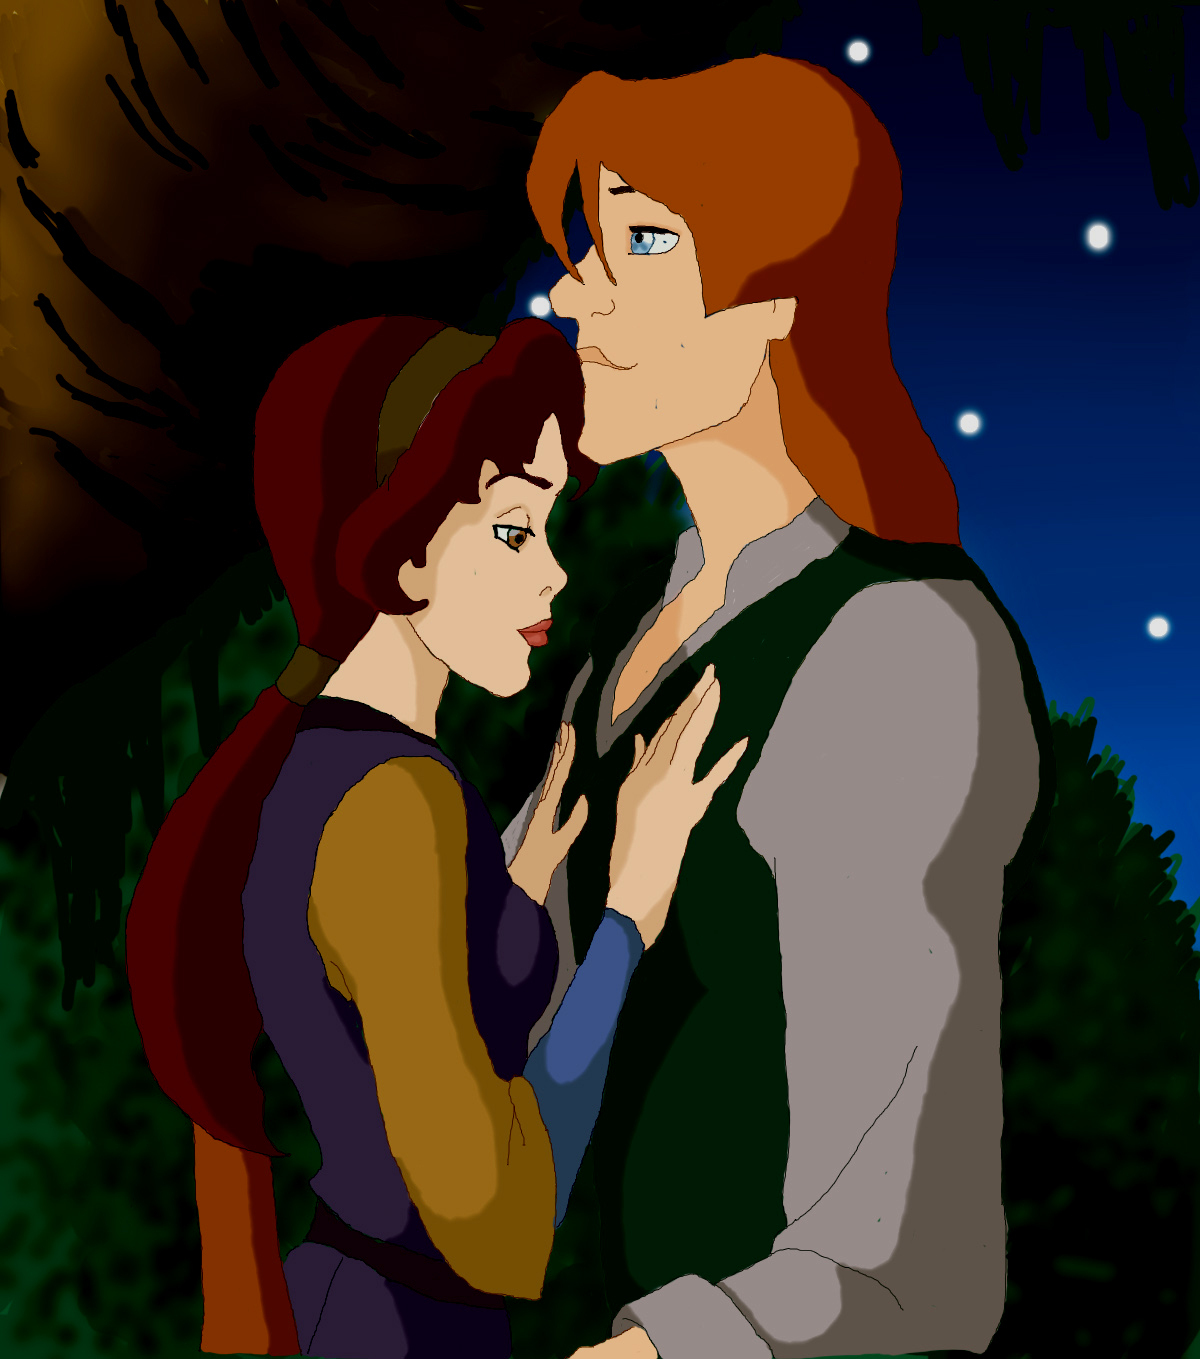 Amazing Quest For Camelot Pictures & Backgrounds